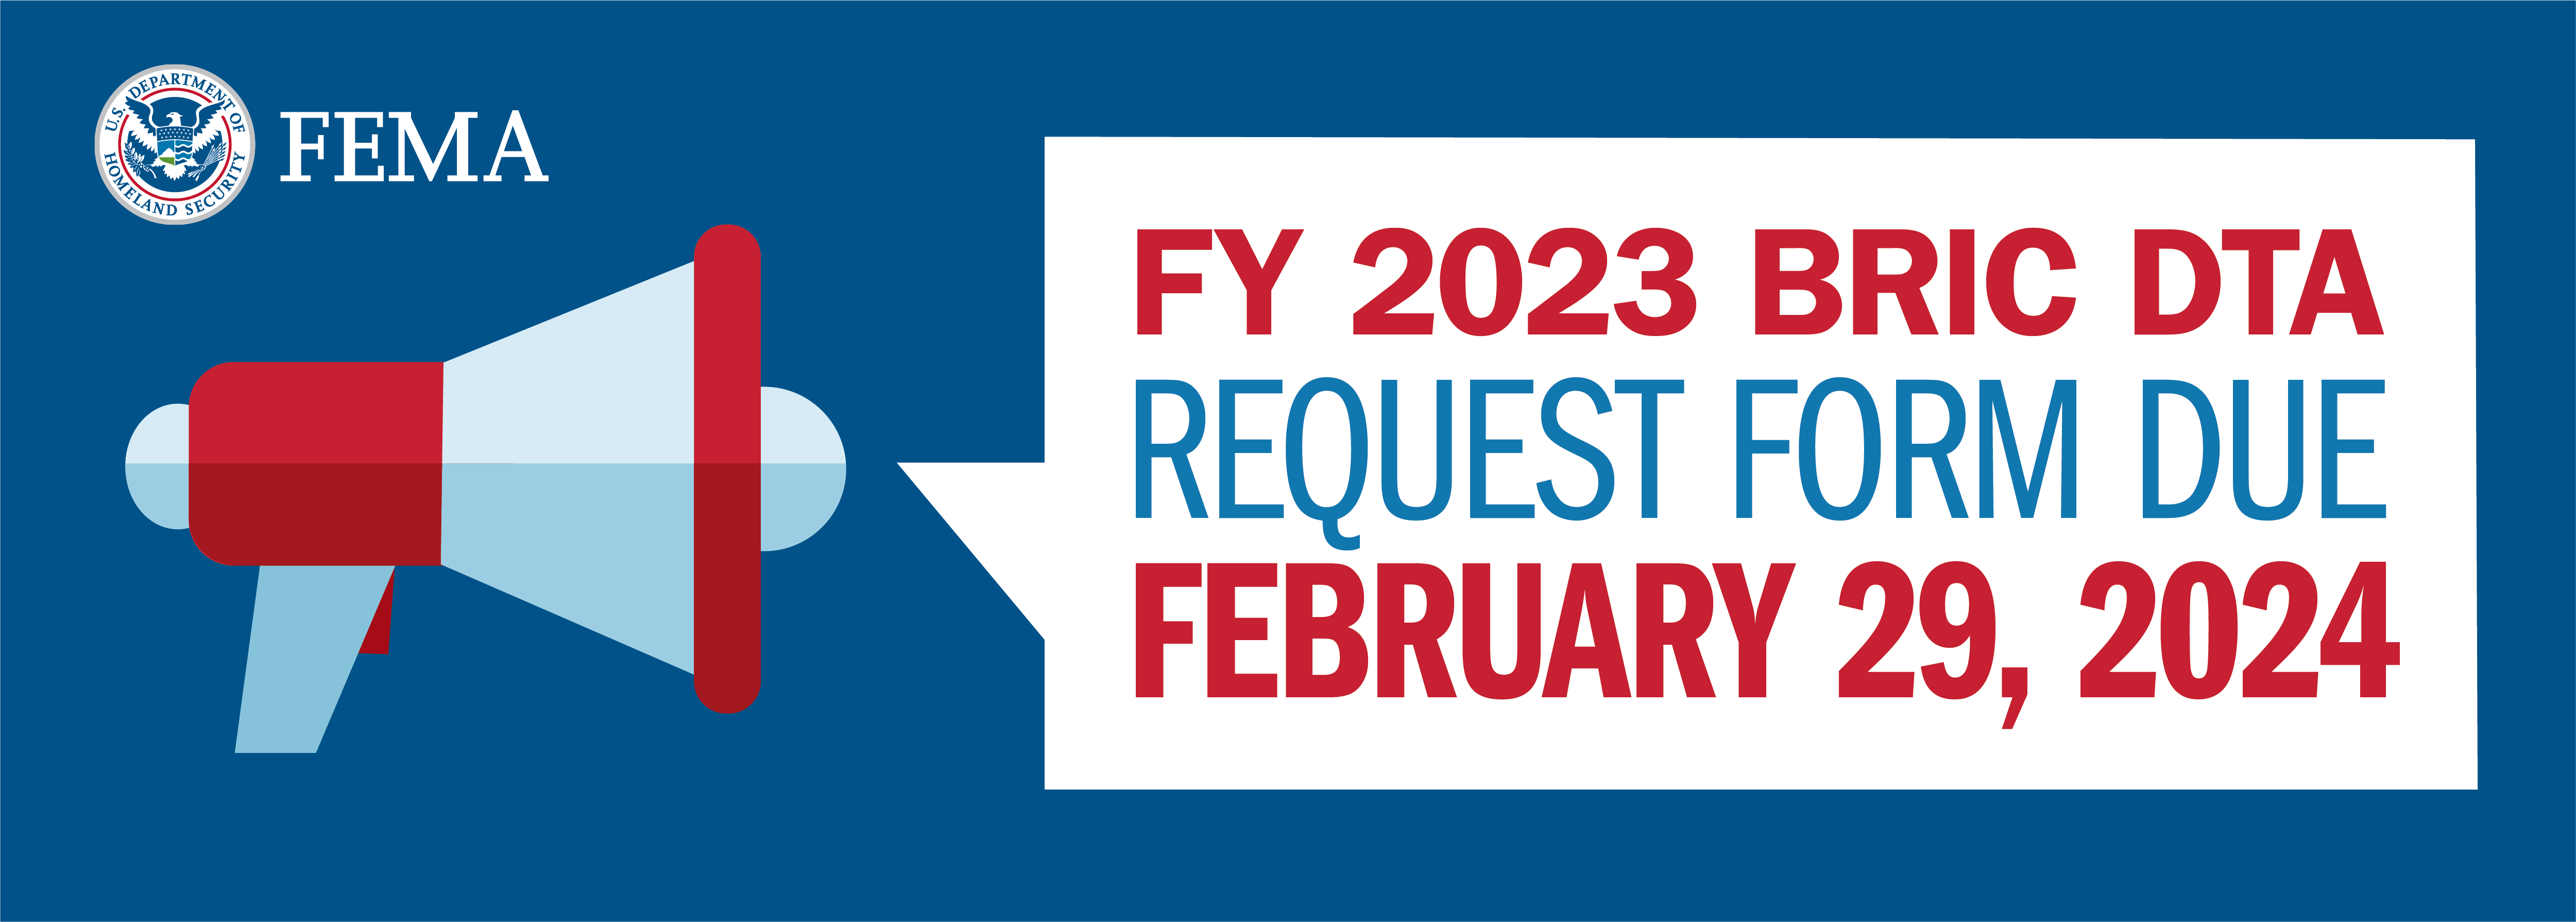 Fiscal Year 2023 BRIC DTA Request Form Due February 29, 2024